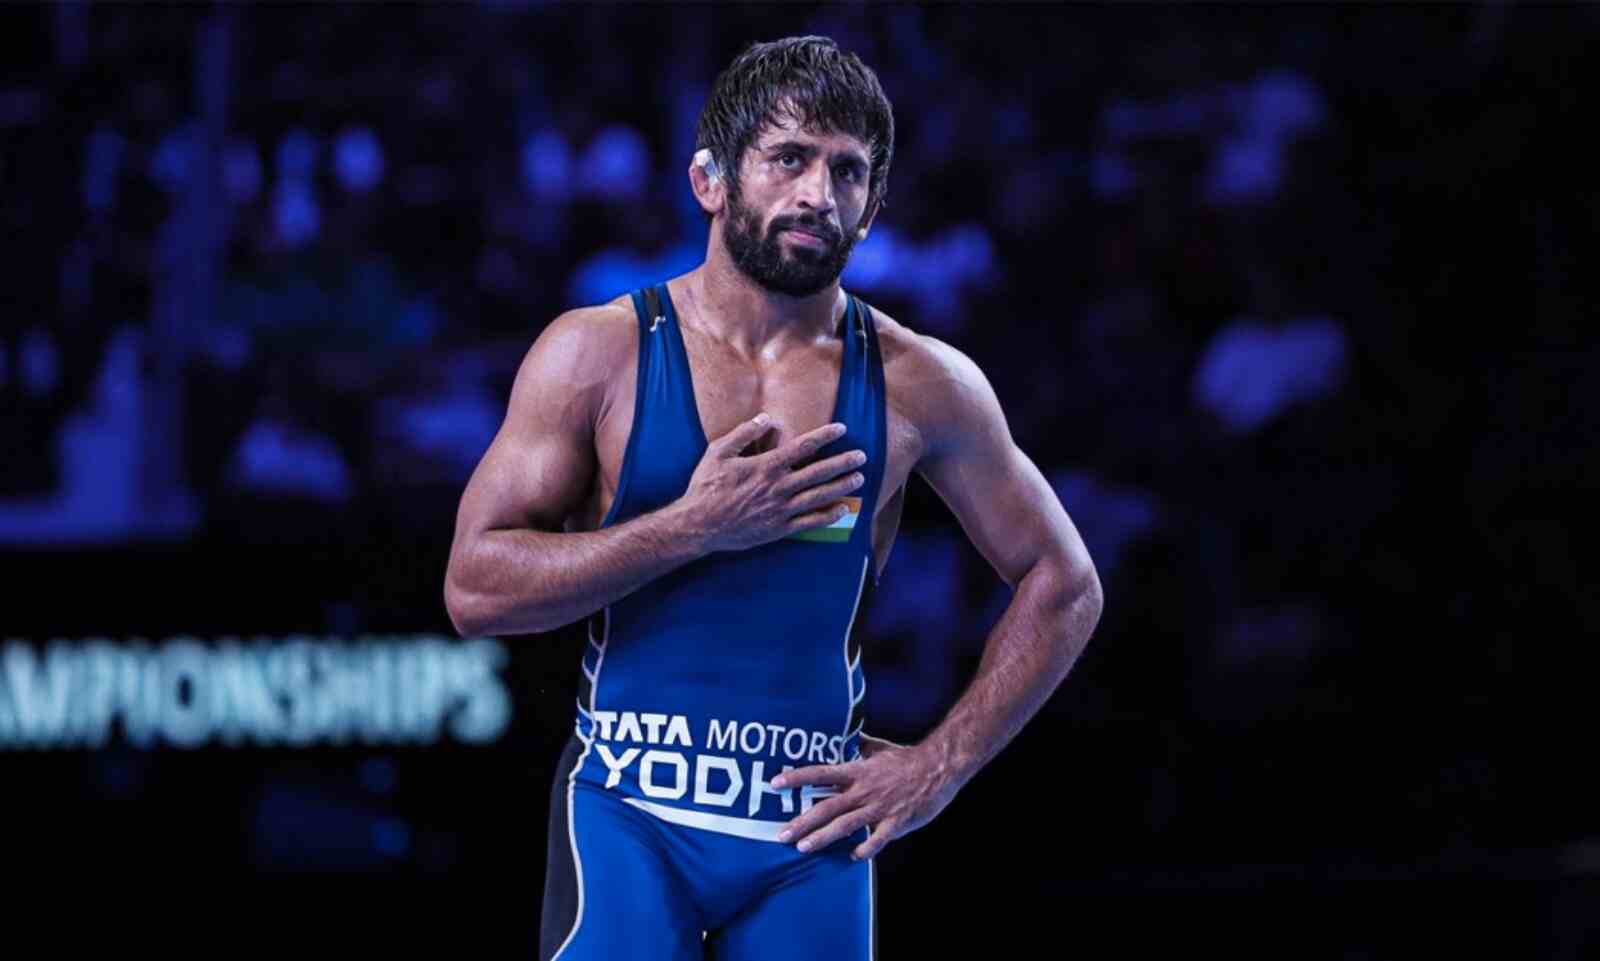 CWG 2022: Wrestling events comes to pause after major security breach at stadium, venue gets vacated, UWW says action to resume